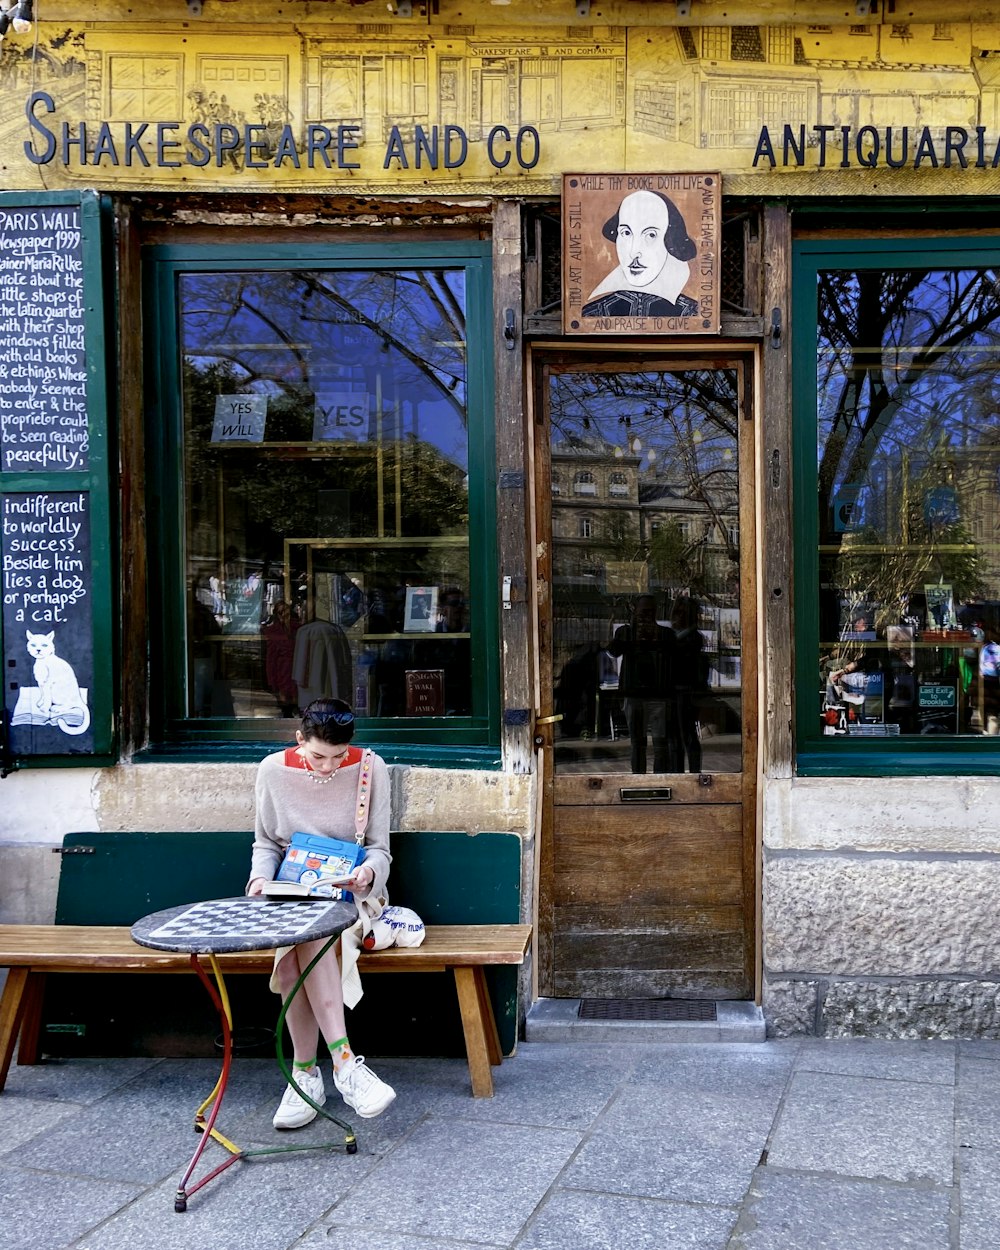 a person sitting on a bench in front of a store